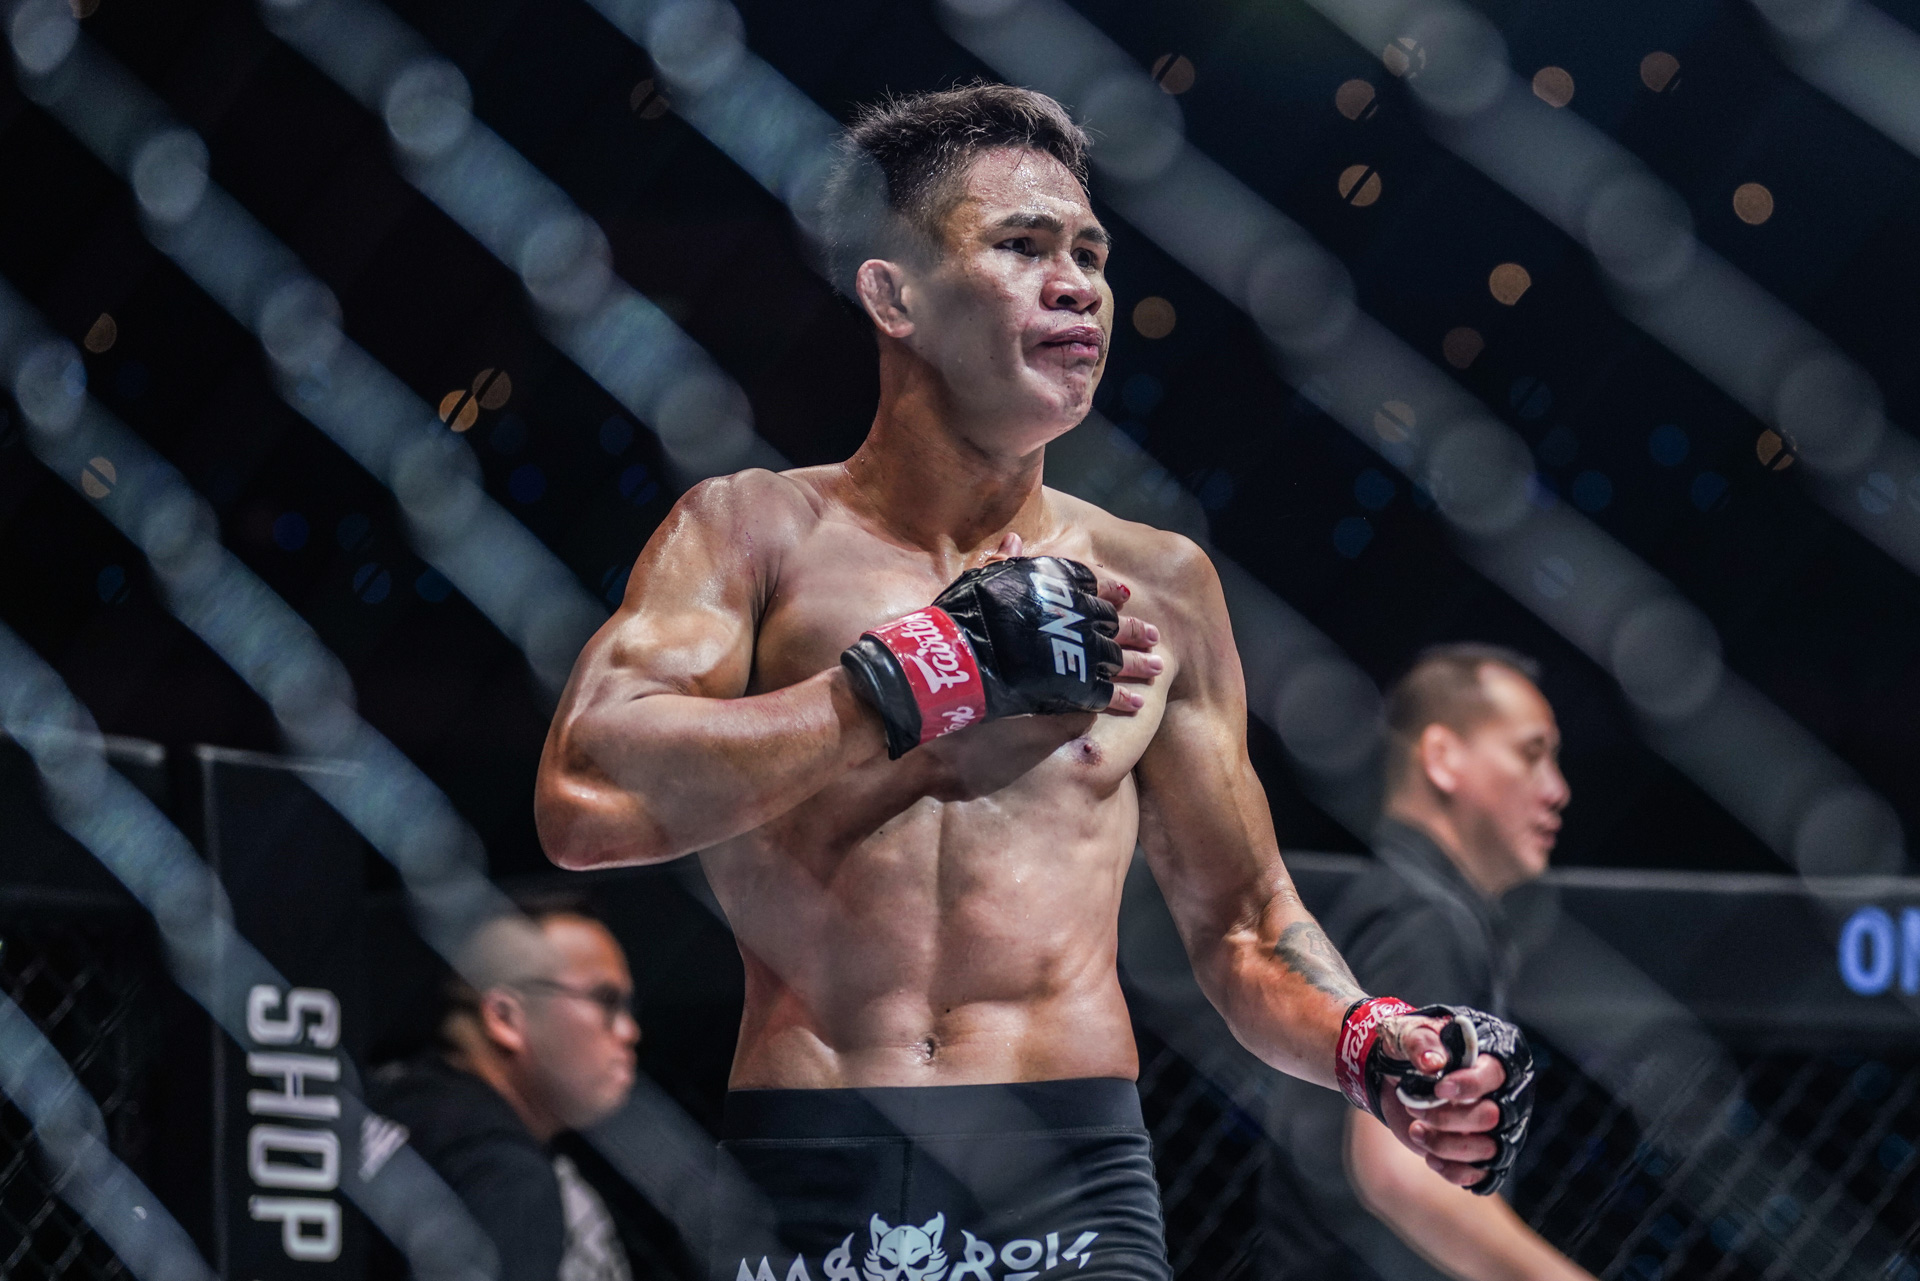 ONE-Fight-Night-3-Jeremy-Miado-def-Danial-Williams Lito Adiwang wants to settle unfinished business with Jeremy Miado Mixed Martial Arts News ONE Championship  - philippine sports news